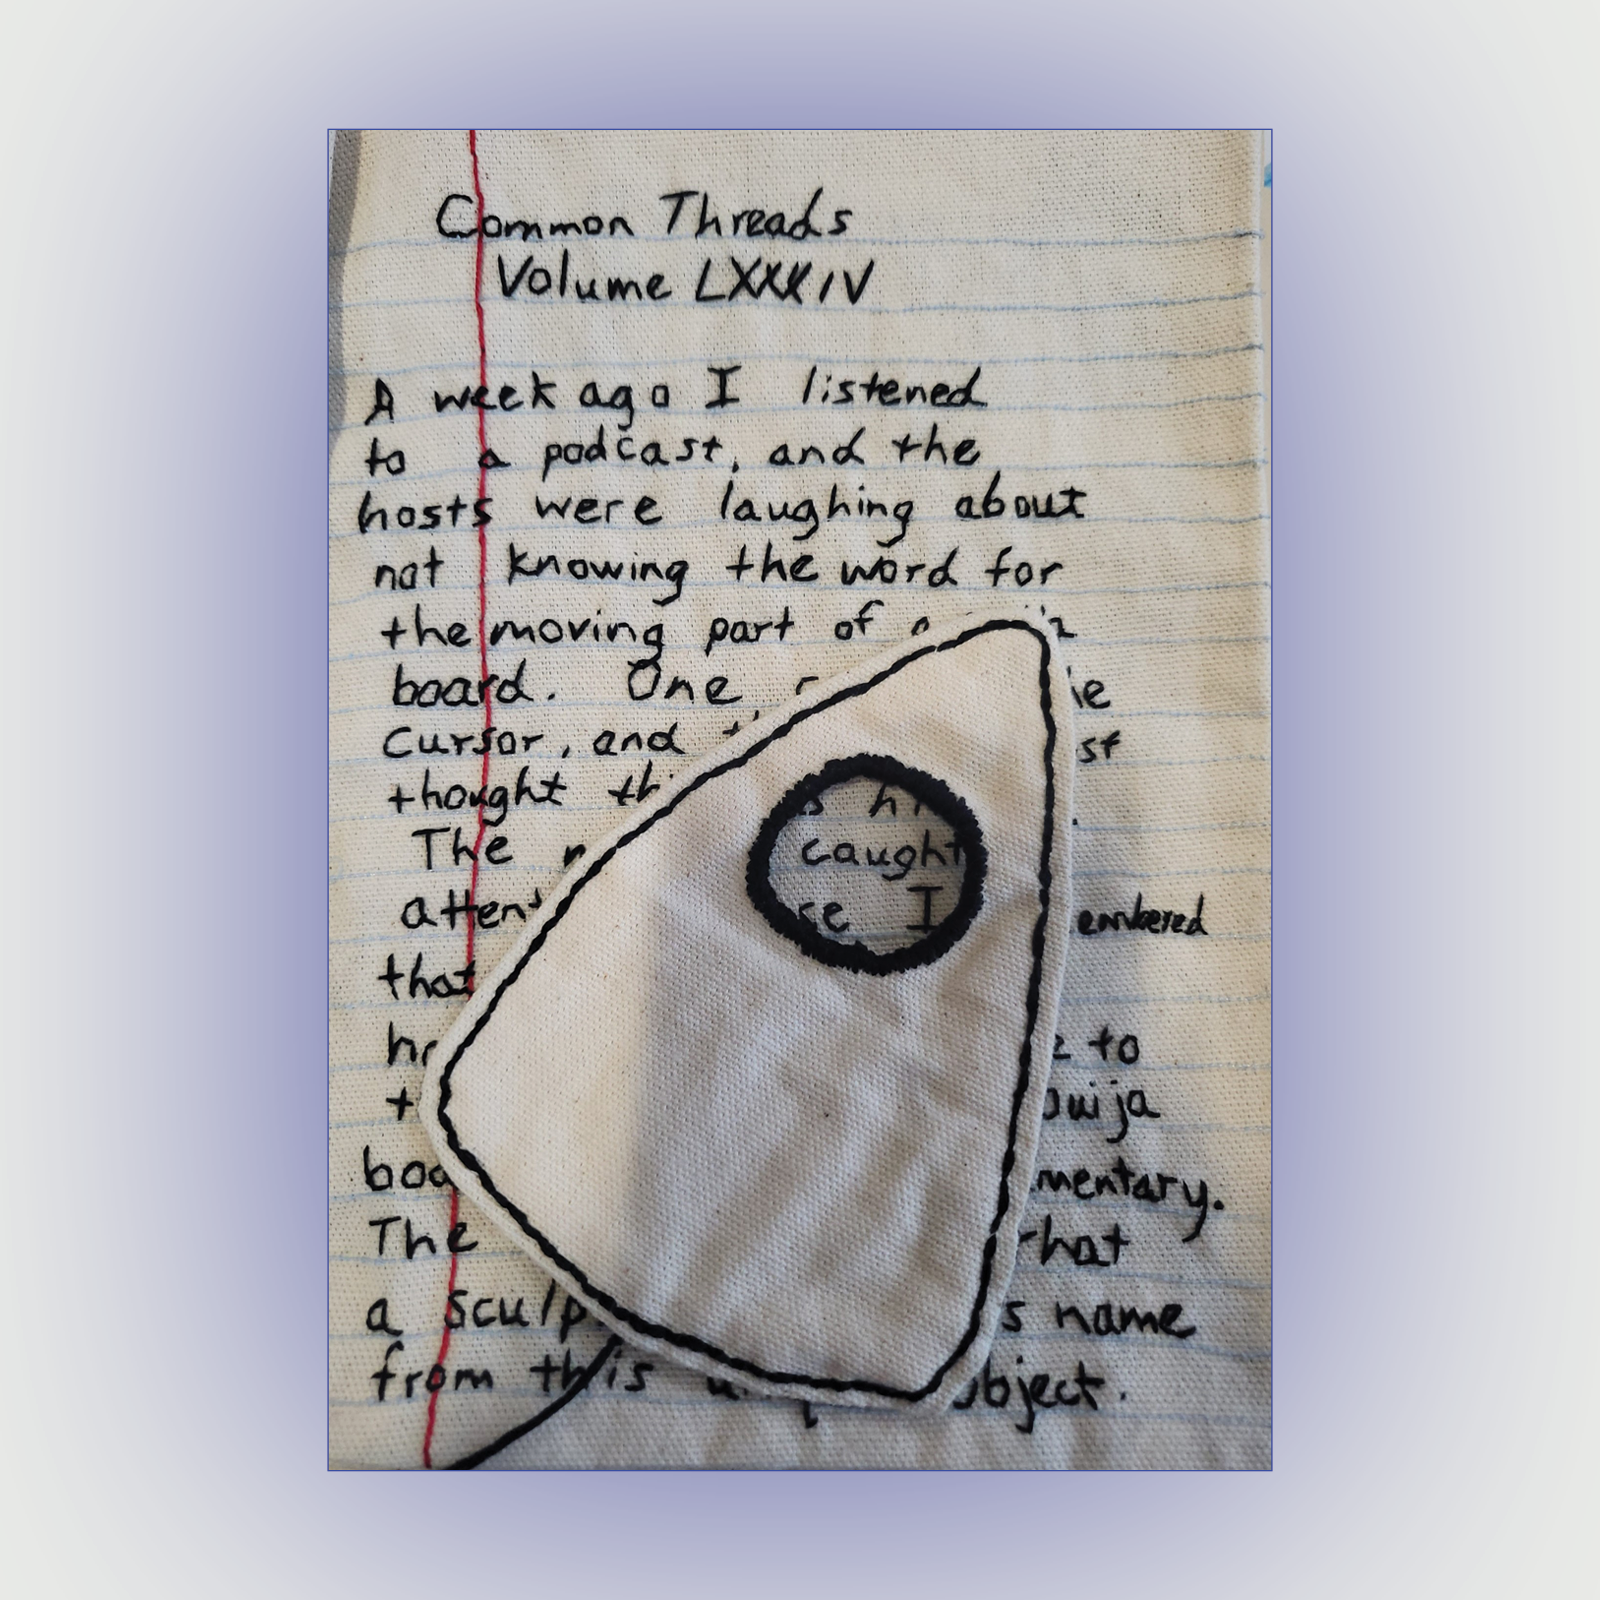 A sheet of lined notebook paper with handwritten notes. The headline says "Common Threads, Volume LXXXIV." The writing is obscured by a triangular piece of fabric with a large hole at the top.